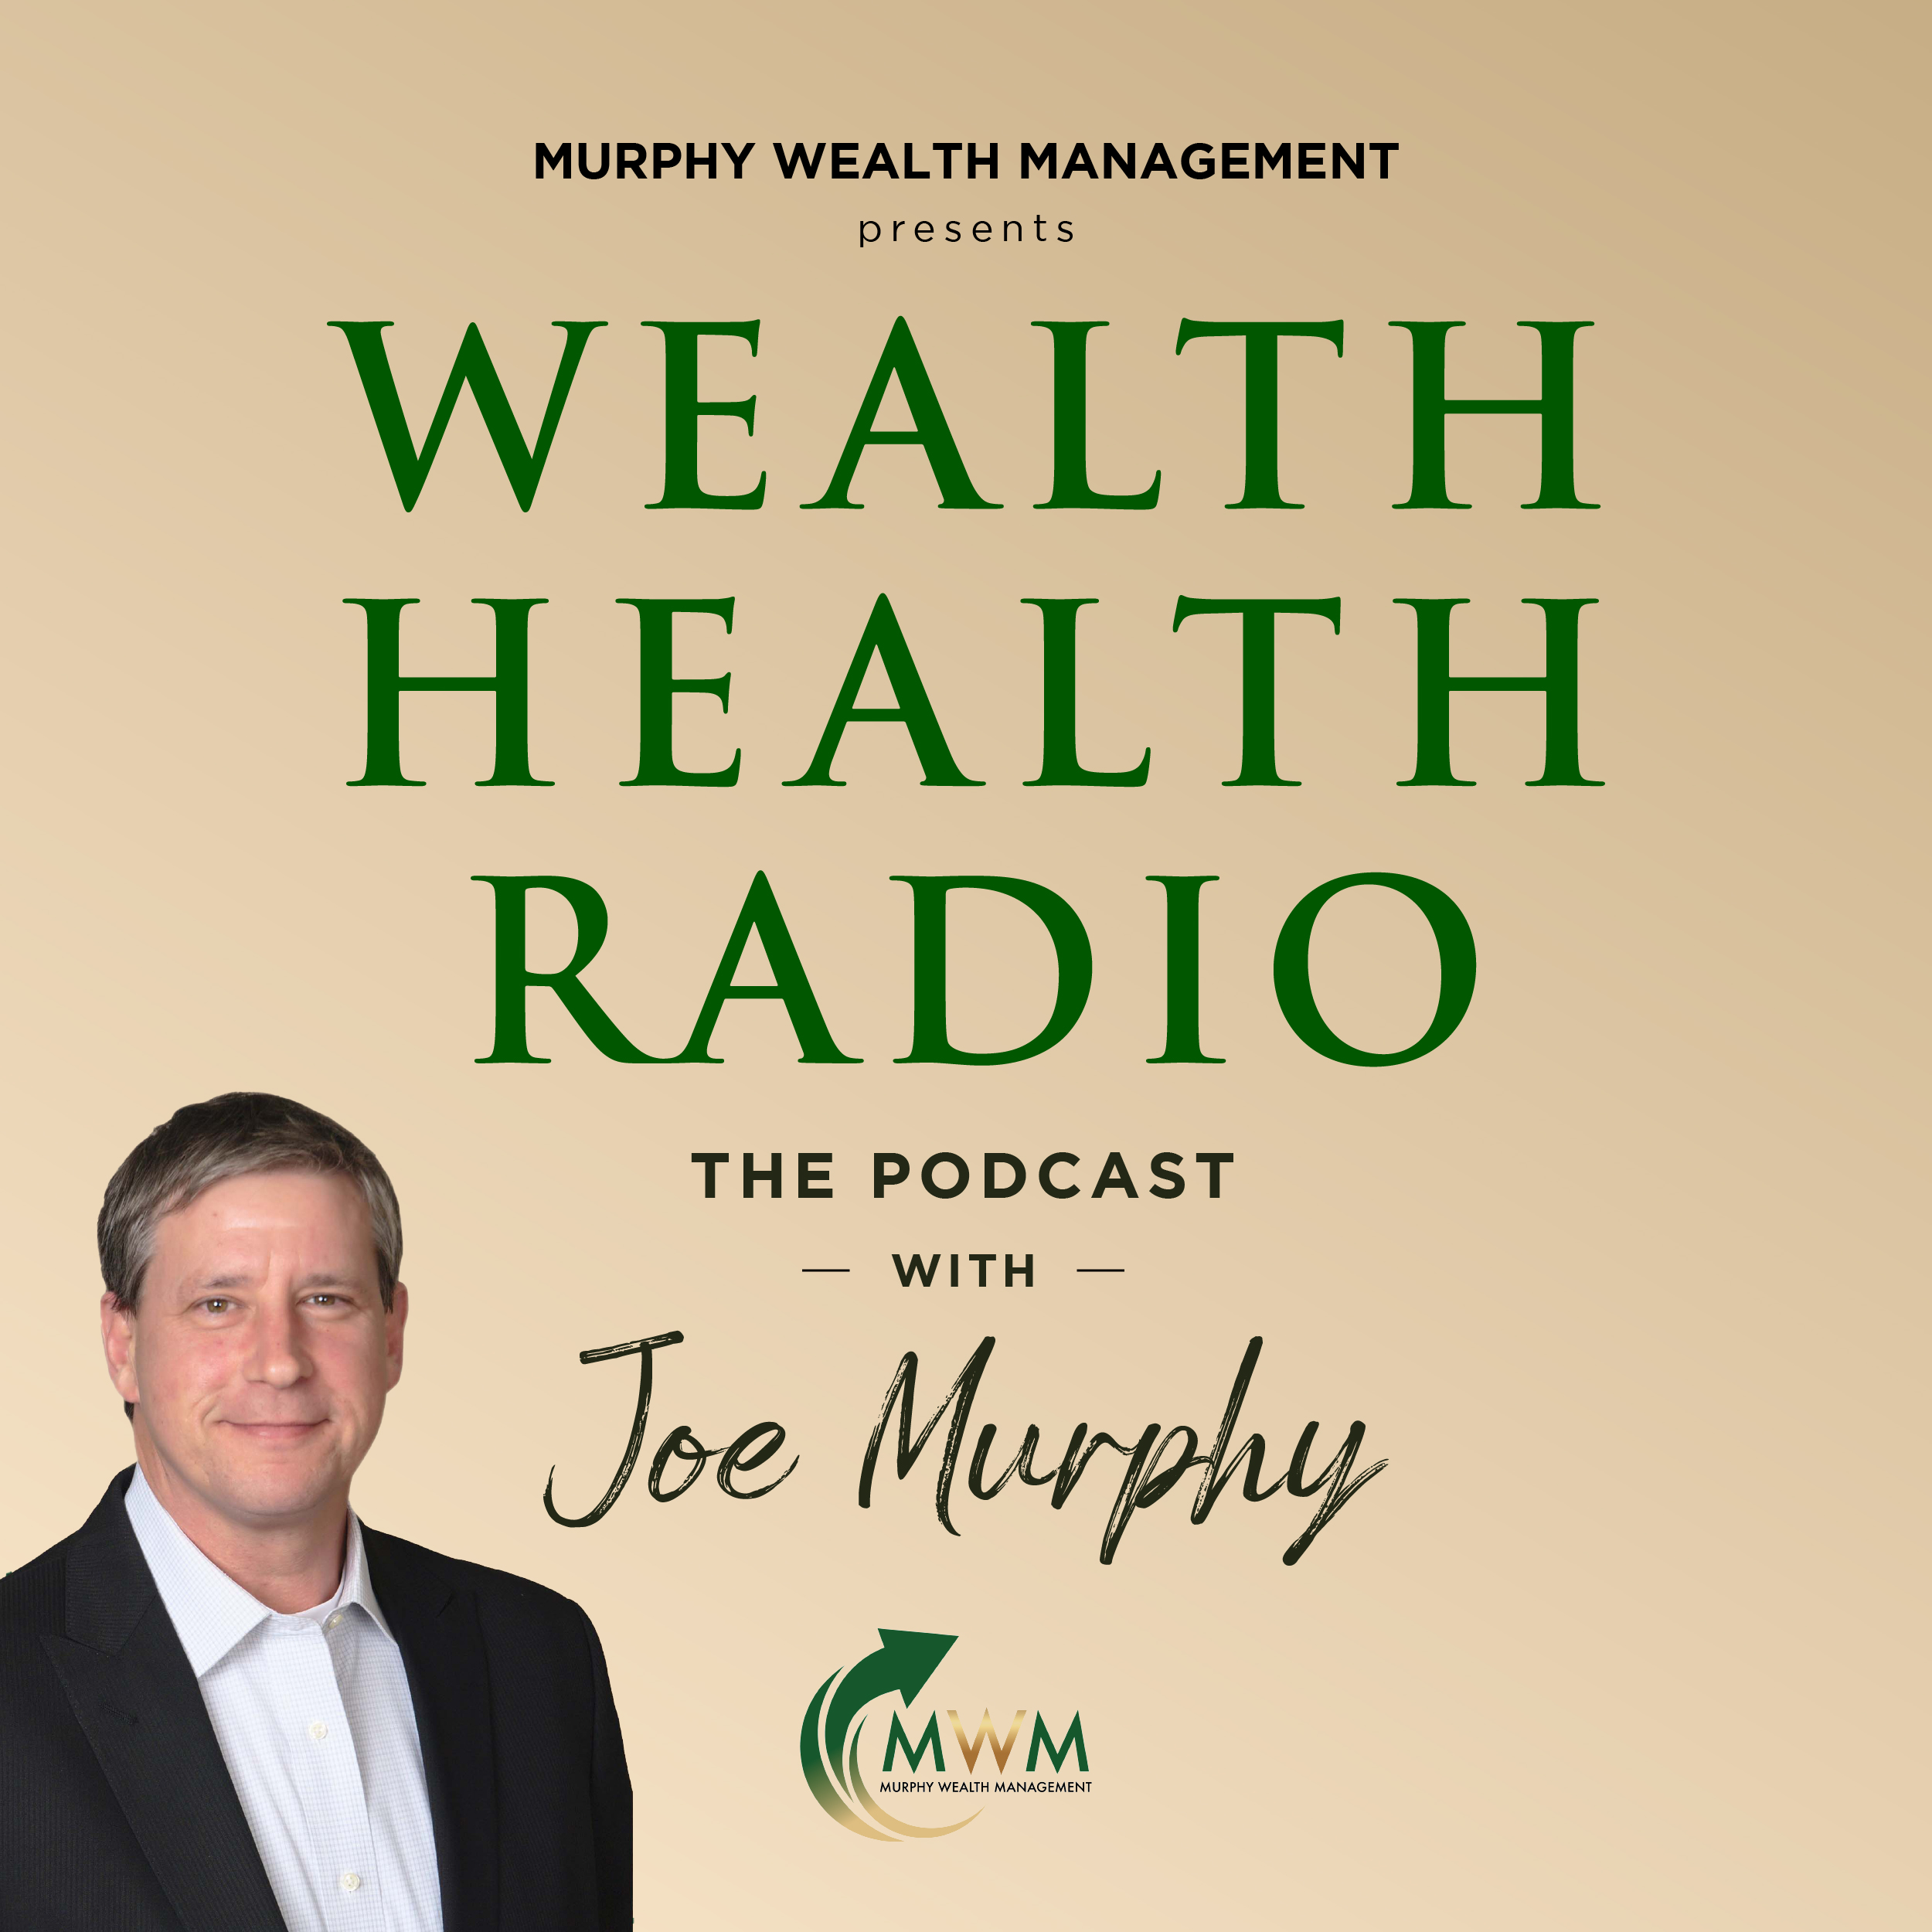 Wealth Health Radio Reverse mortgages the topic this week with Joe Murphy and special guest Dennis Loxton